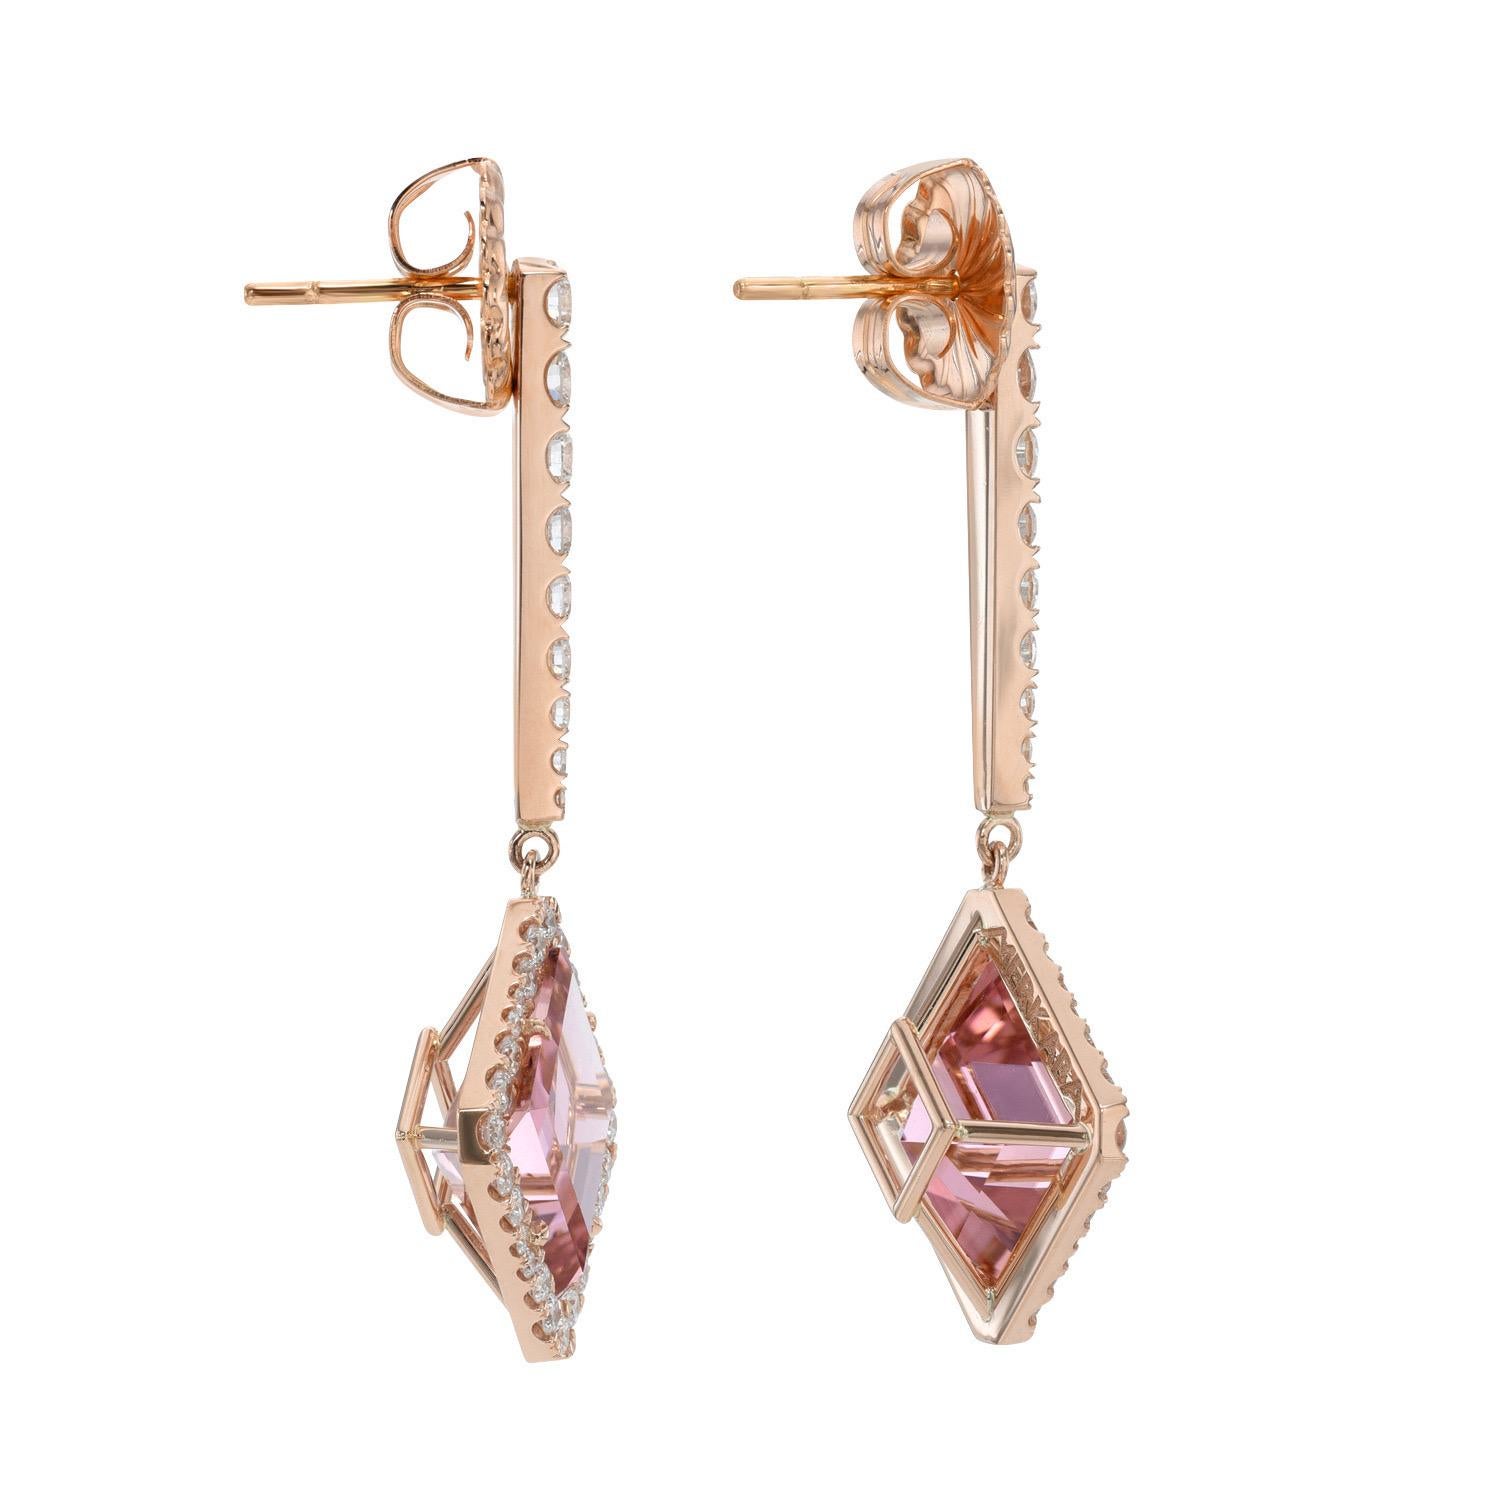 Unique 7.67 carats total Kite shaped Pink Tourmaline drop earrings, decorated with a total of 1.37 carat round brilliant collection diamonds. Crafted by extremely skilled hands in 18K rose gold.
Returns are accepted and paid by us within 7 days of